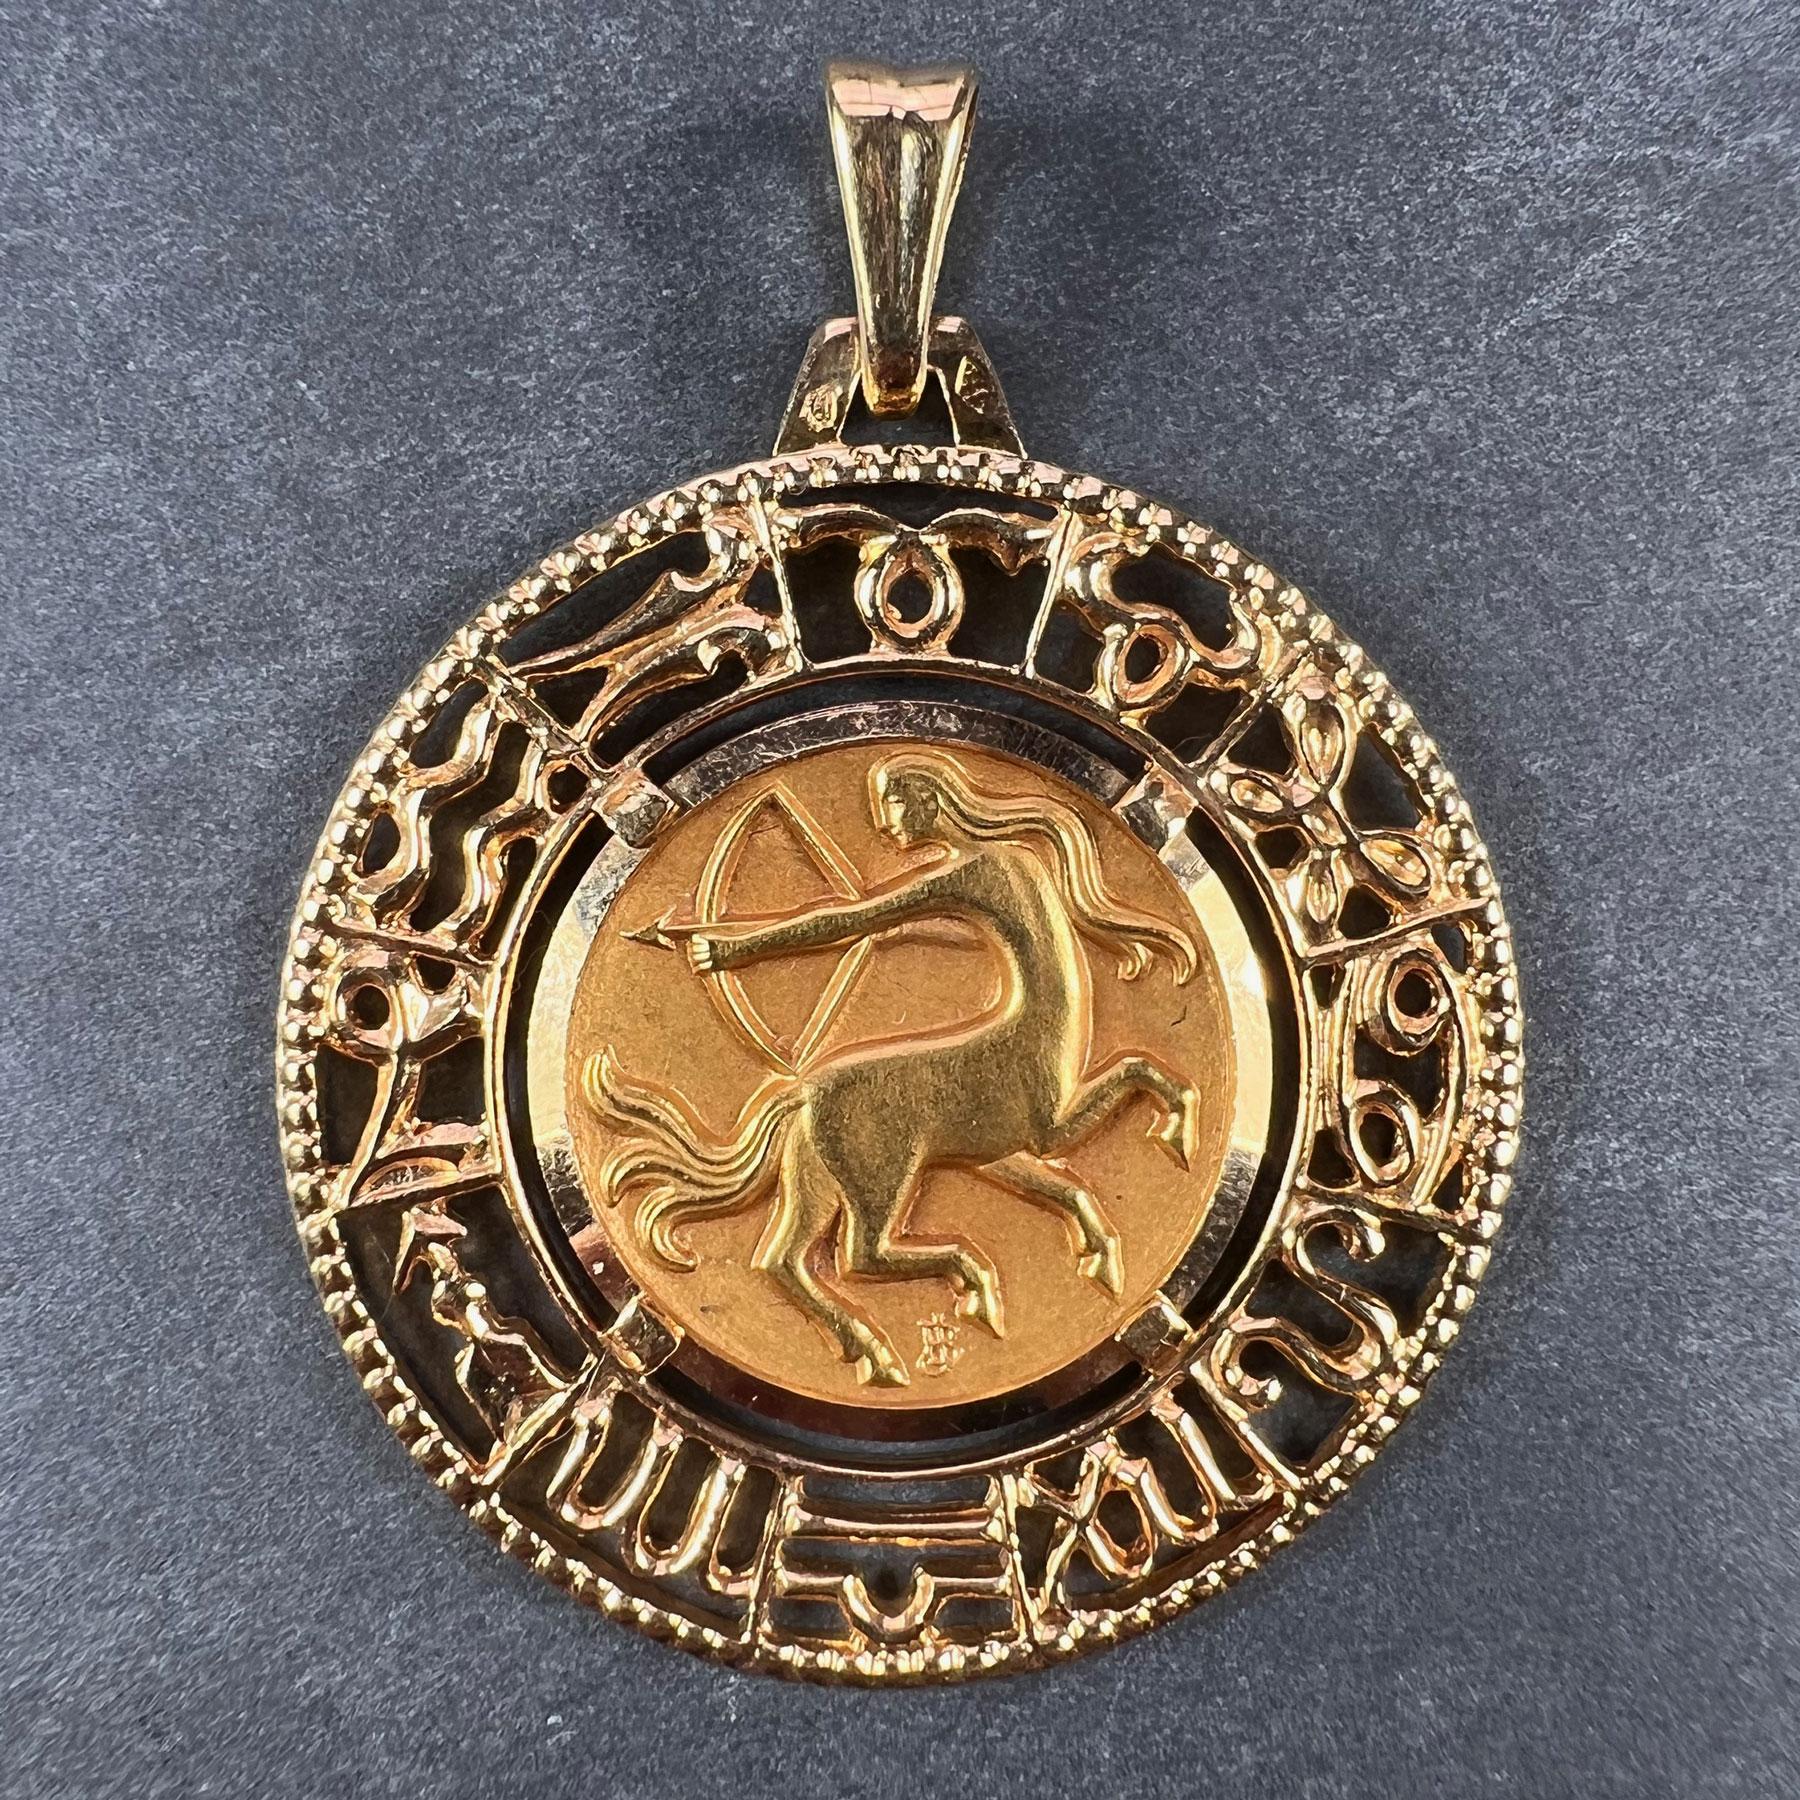 An 18 karat (18K) yellow gold charm pendant designed as a pierced medal of the Zodiac starsign for Sagittarius, signed JB, surrounded by a frame depicting the symbols of the other Zodiac starsigns. Stamped with the eagle mark for 18 karat gold and